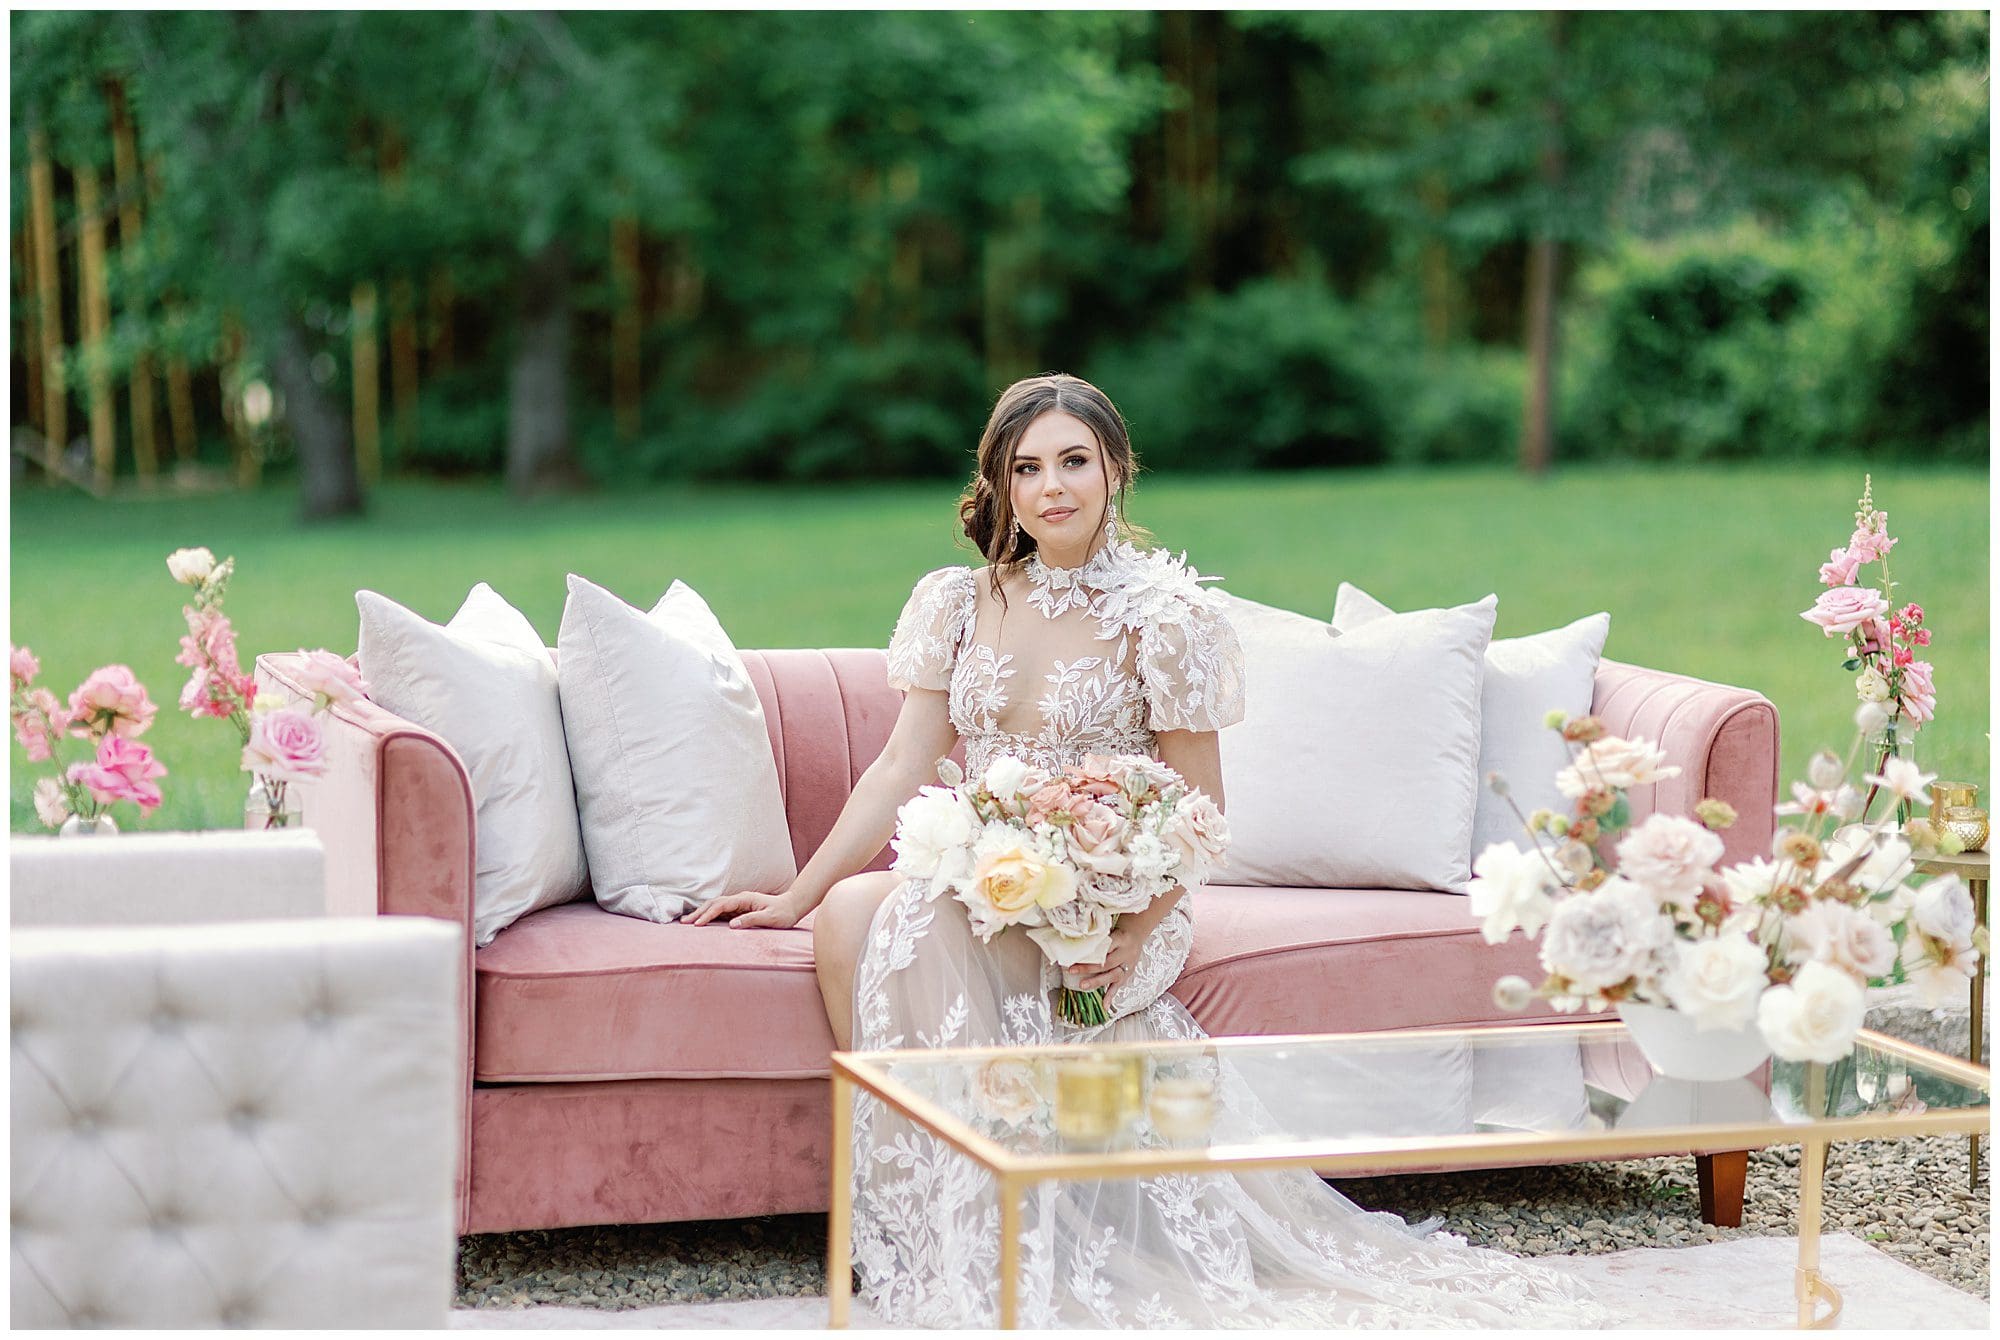 A bride sitting on a pink couch in a garden.